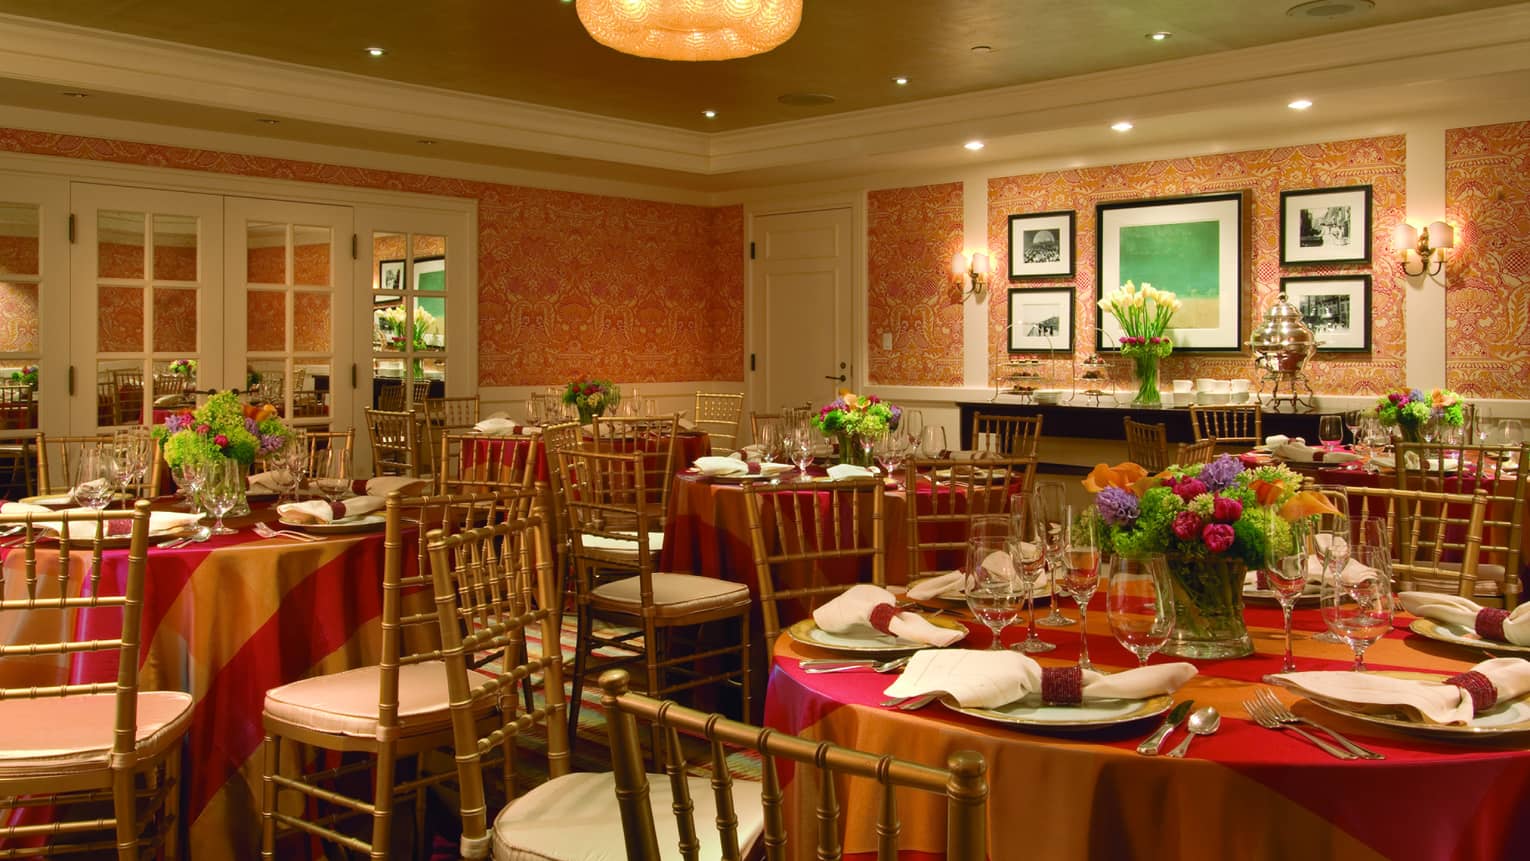 Round banquet tables with red and gold linens, flowers in Benjamin Room 